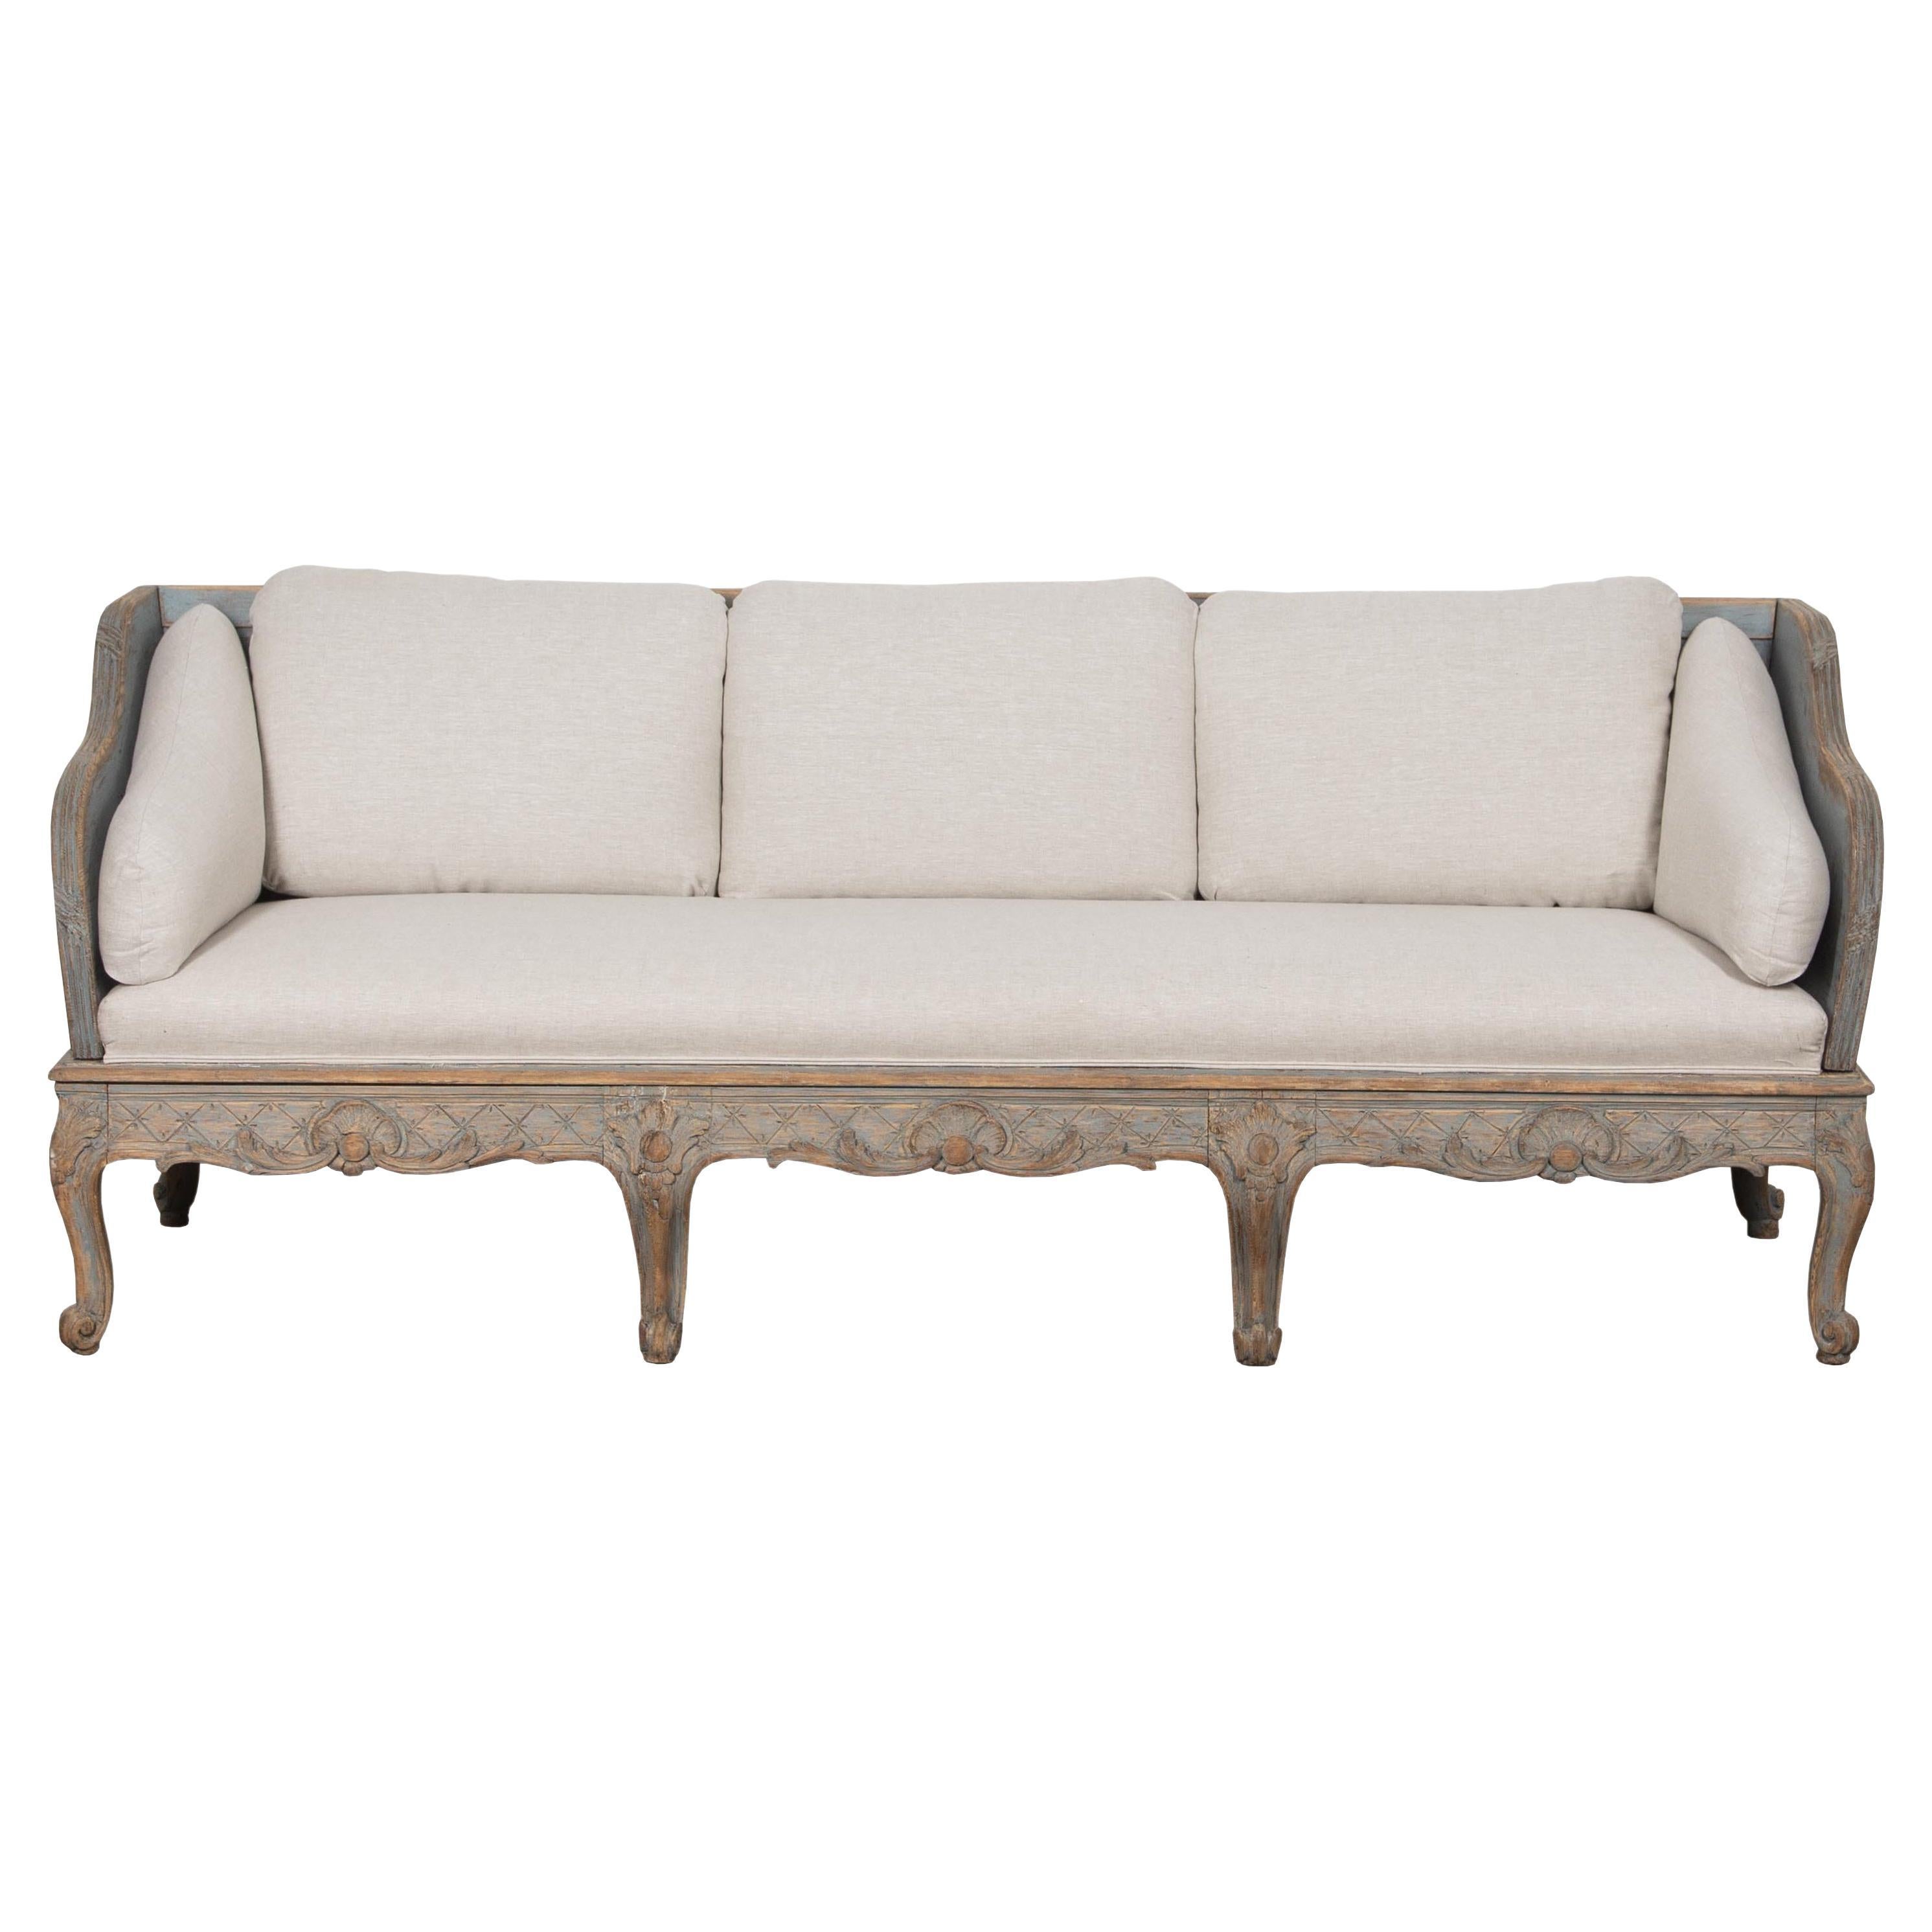 Period Rococo Sofa from Stockholm